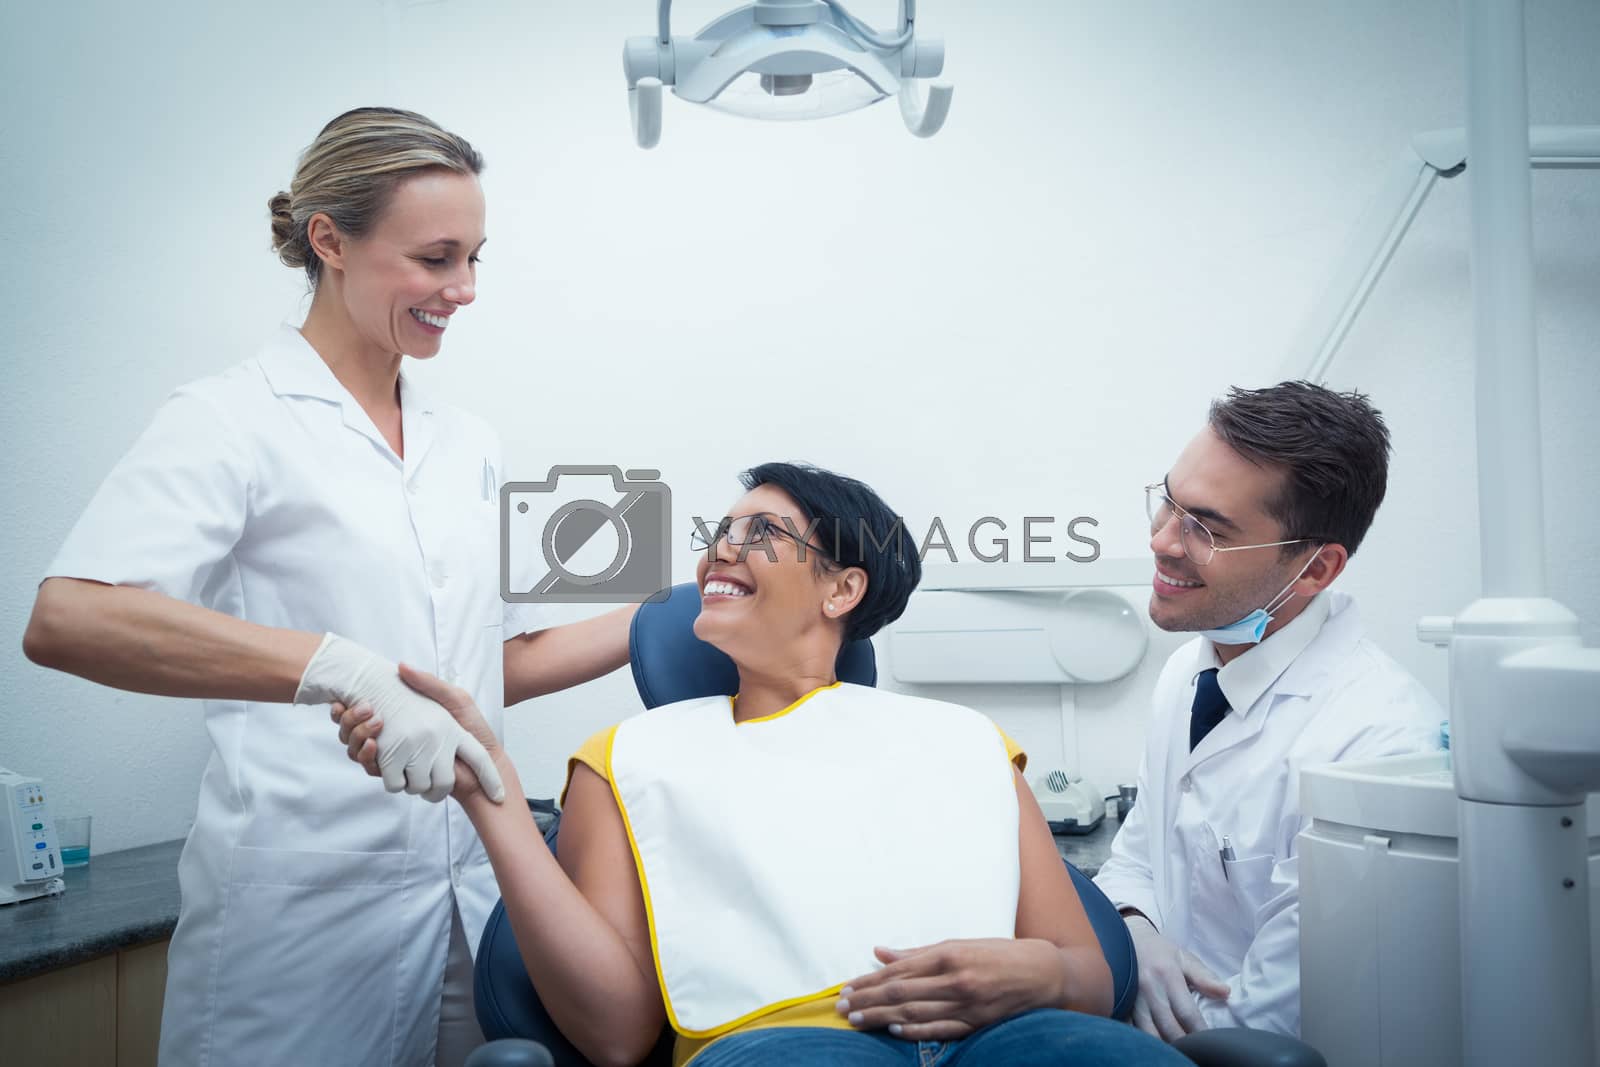 Royalty free image of Male dentist with assistant shaking hands with woman by Wavebreakmedia